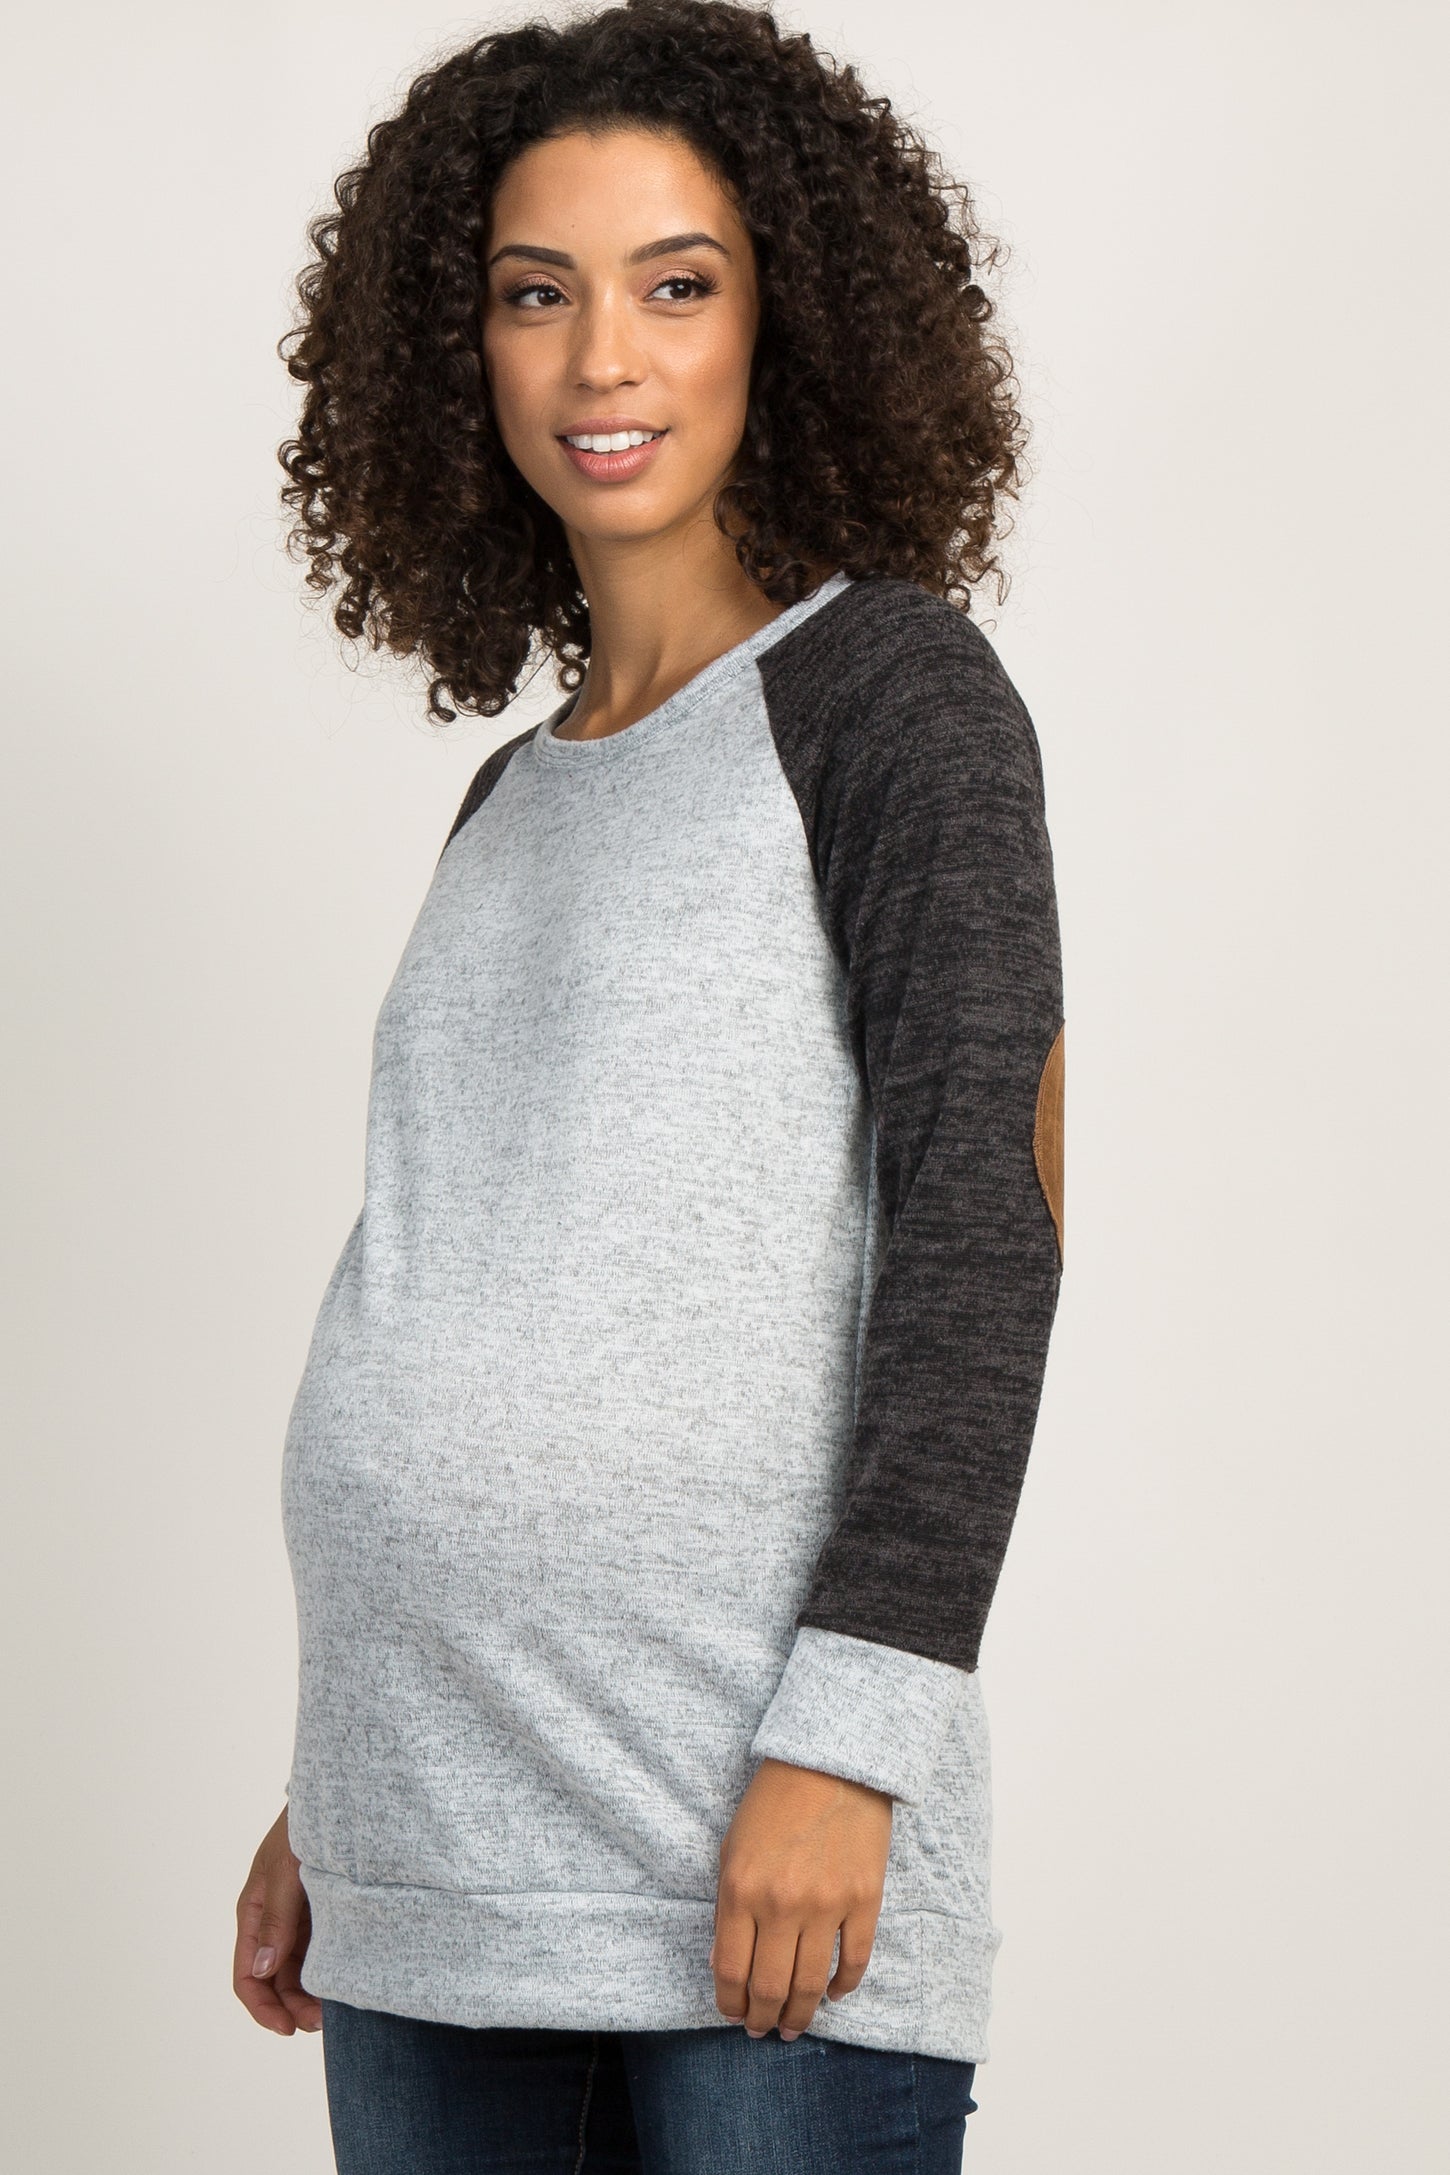 Black Colorblock Soft Knit Elbow Patch Maternity Top